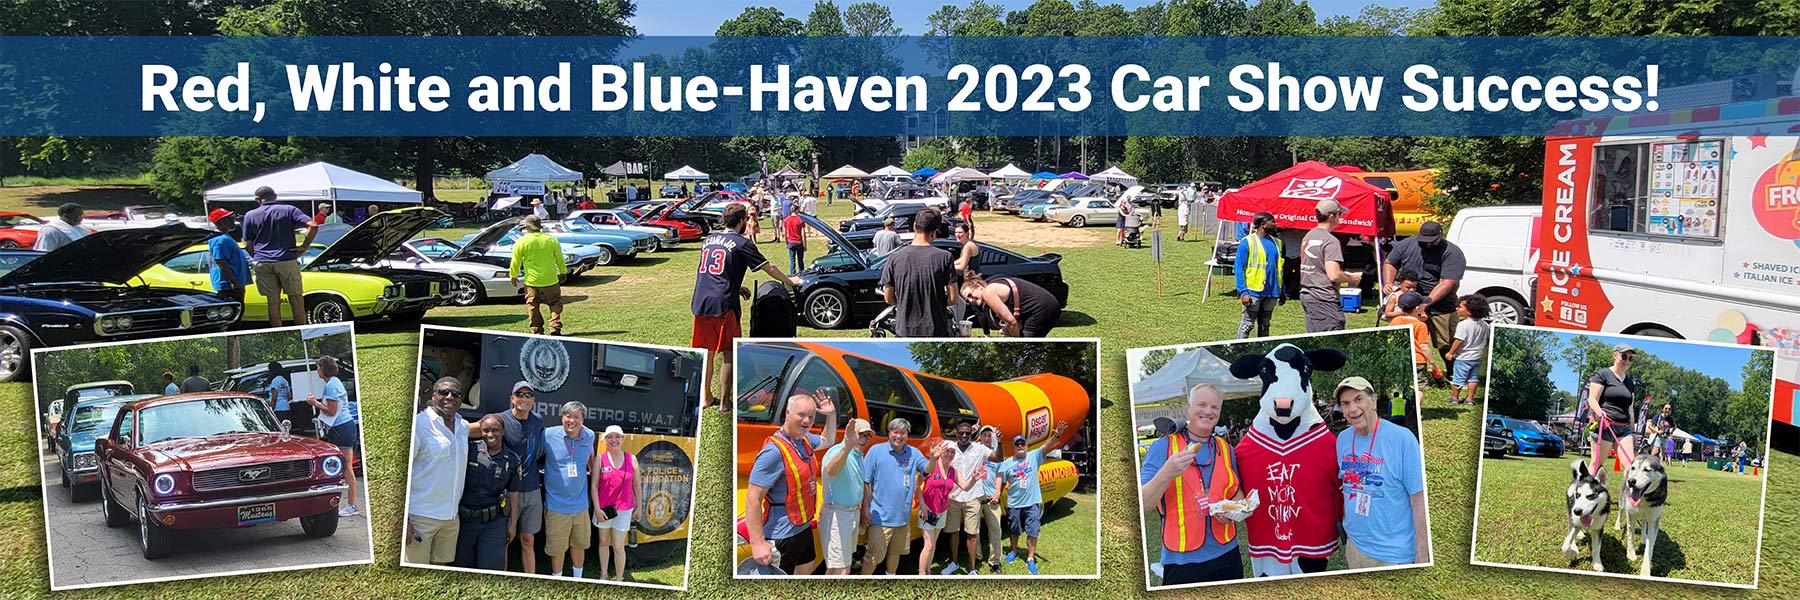 Brookhaven-Chamber-2023-Car-Show